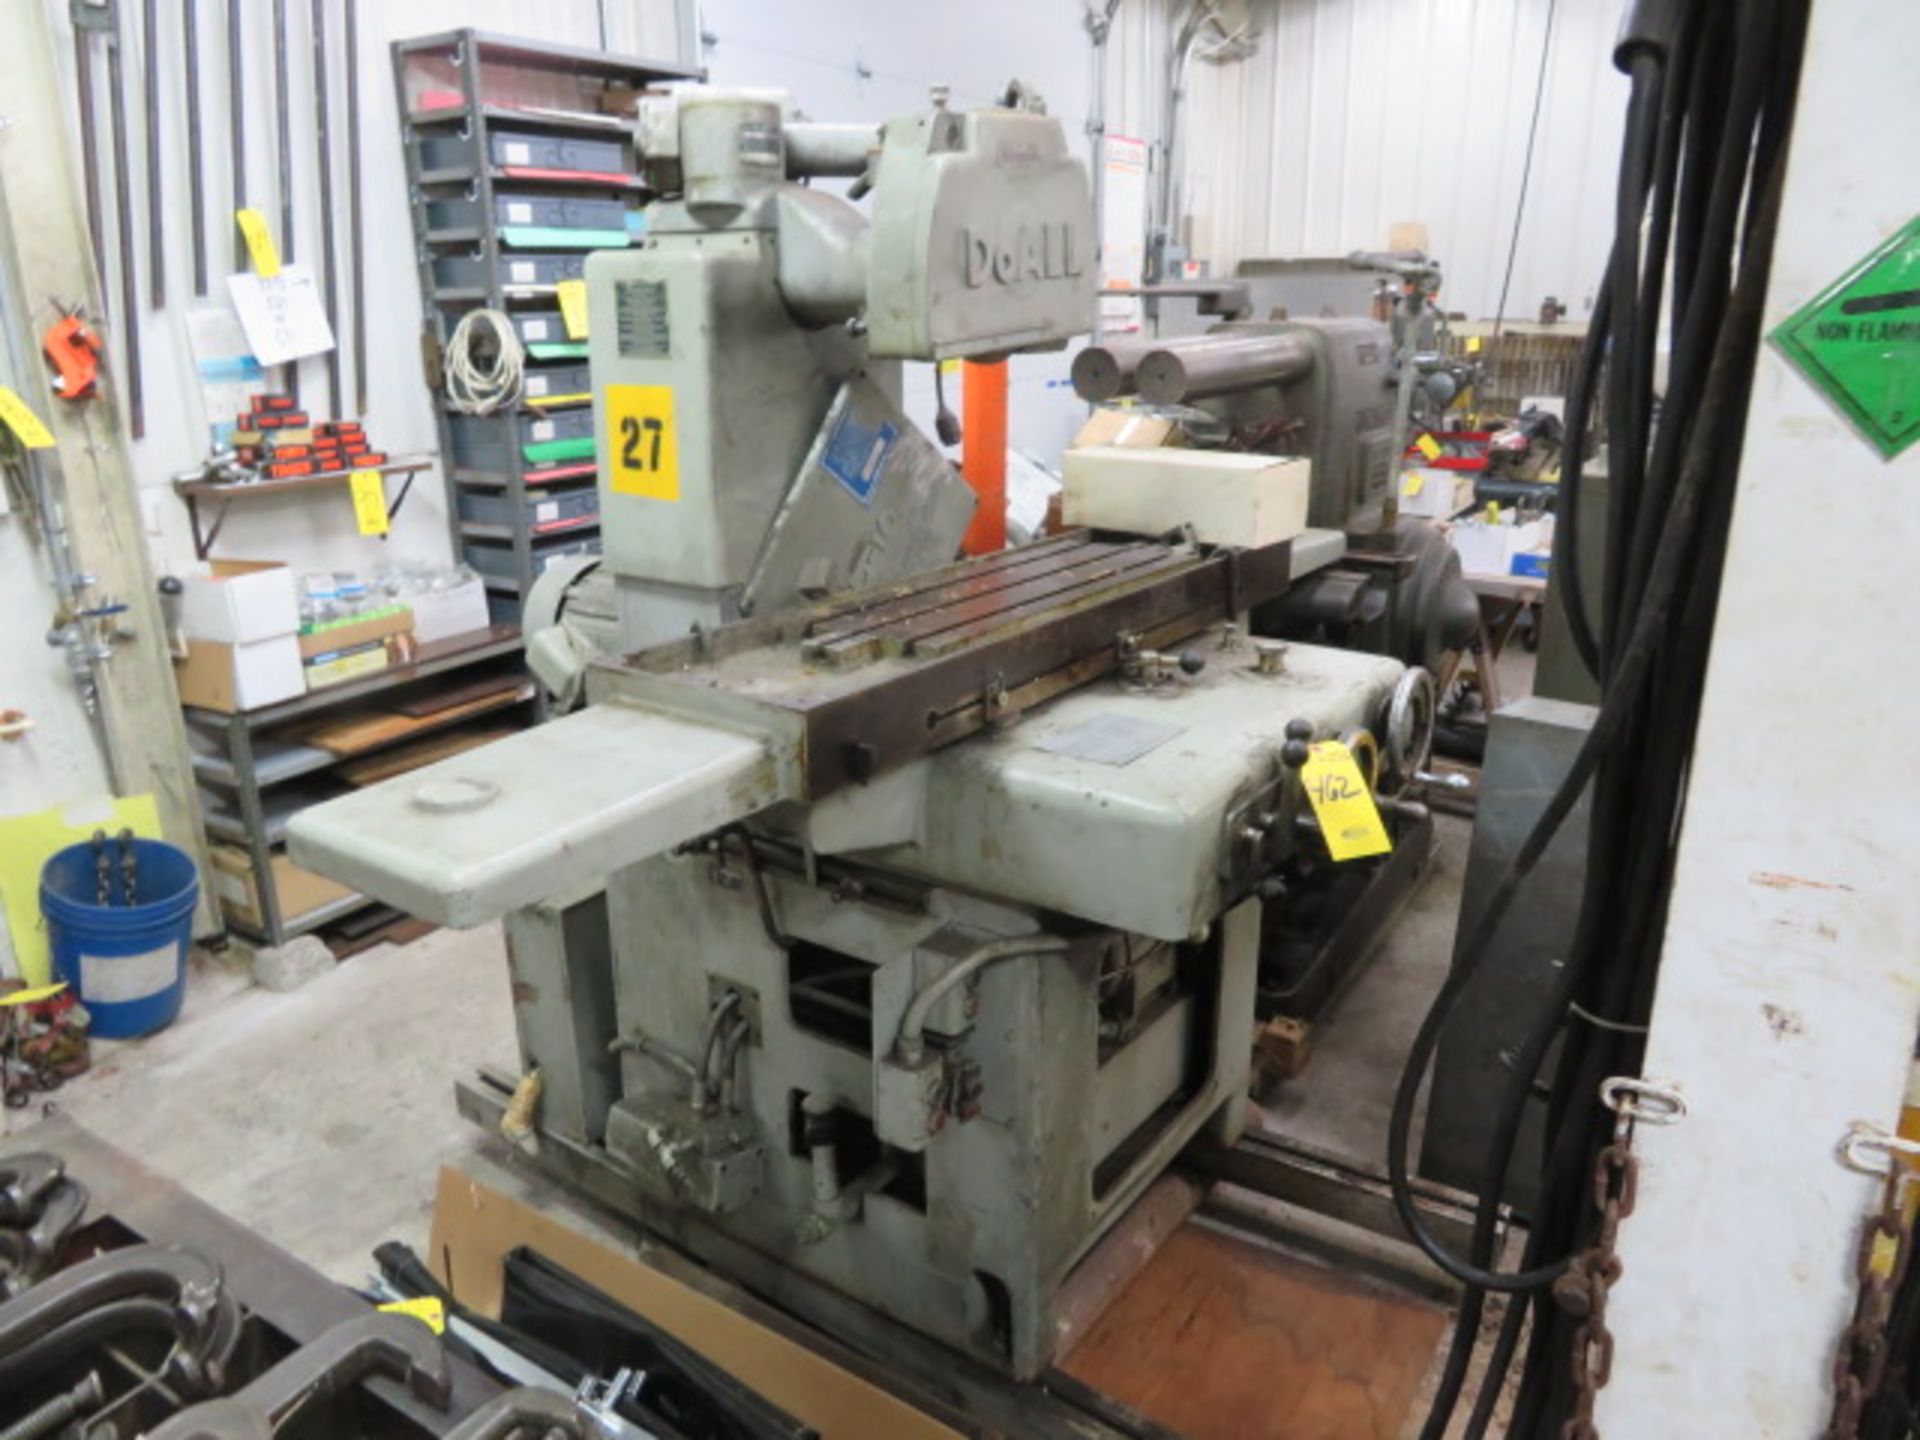 DOALL D10 SURFACE GRINDER S/N 63-53111 (NO MAG CHUCK) AND FOR REBUILD PLUS $200 LOADING FEE